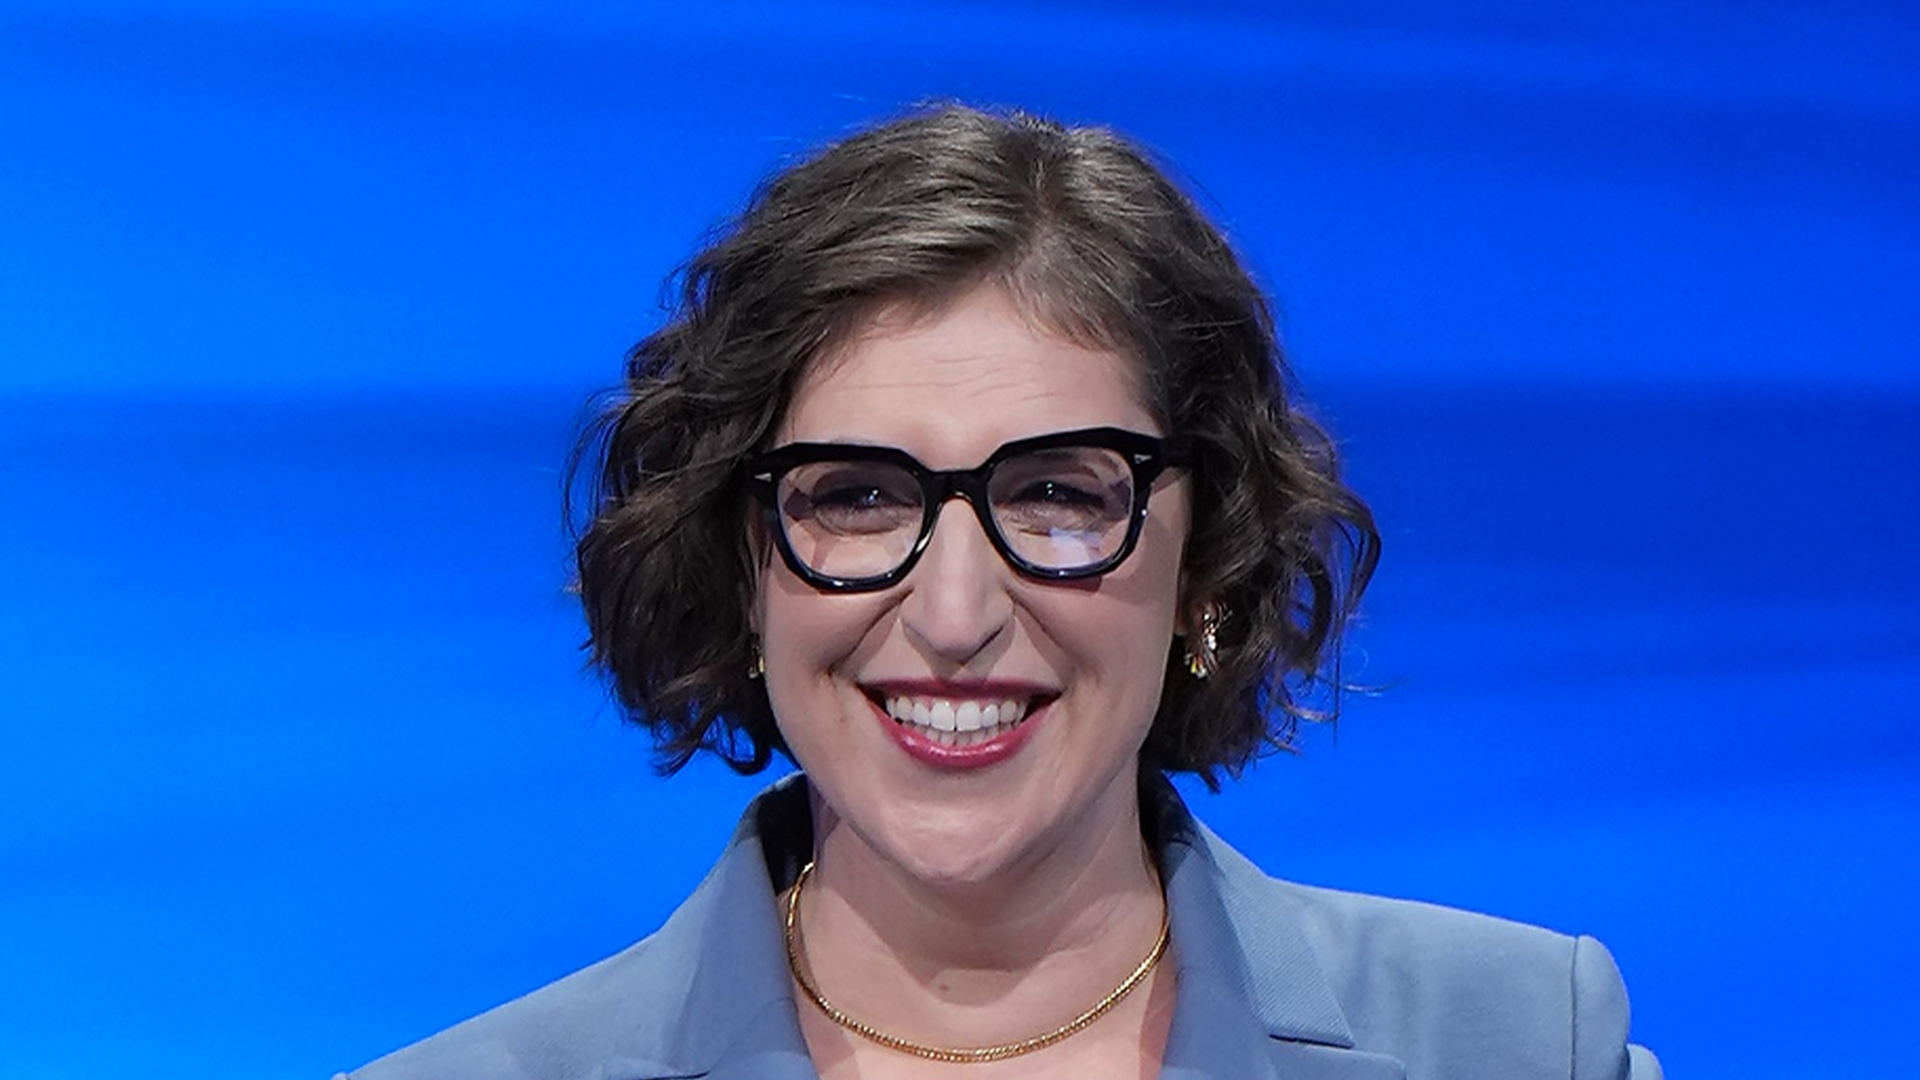 Mayim Bialik’s boyfriend Jonathan Cohen opens up about ‘sadness’ and ‘grieving’ following her exit from Jeopardy!